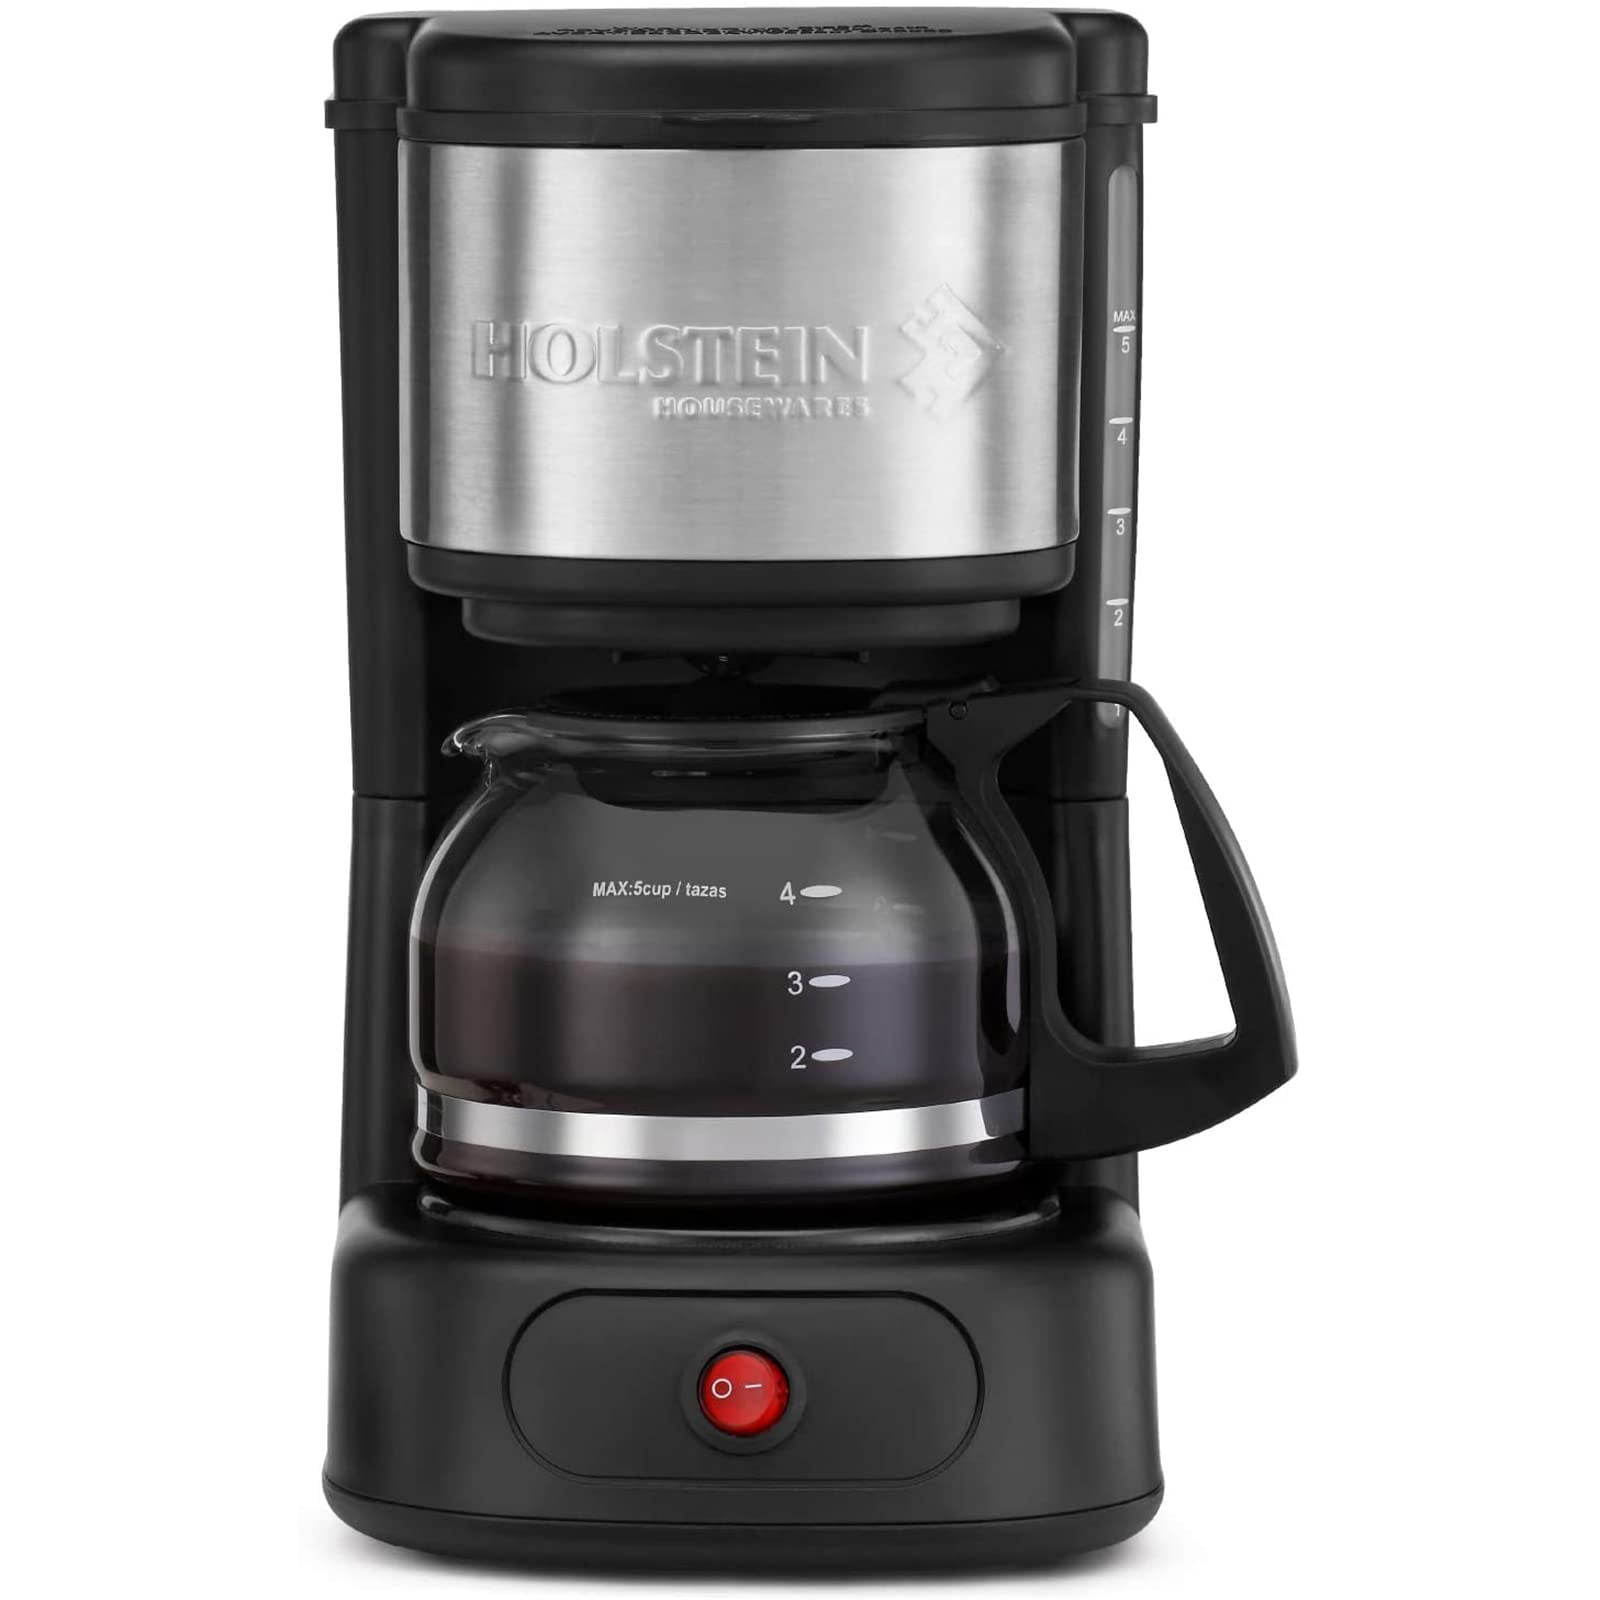 Holstein Housewares - 5 Cup Drip Coffee Maker - Convenient and